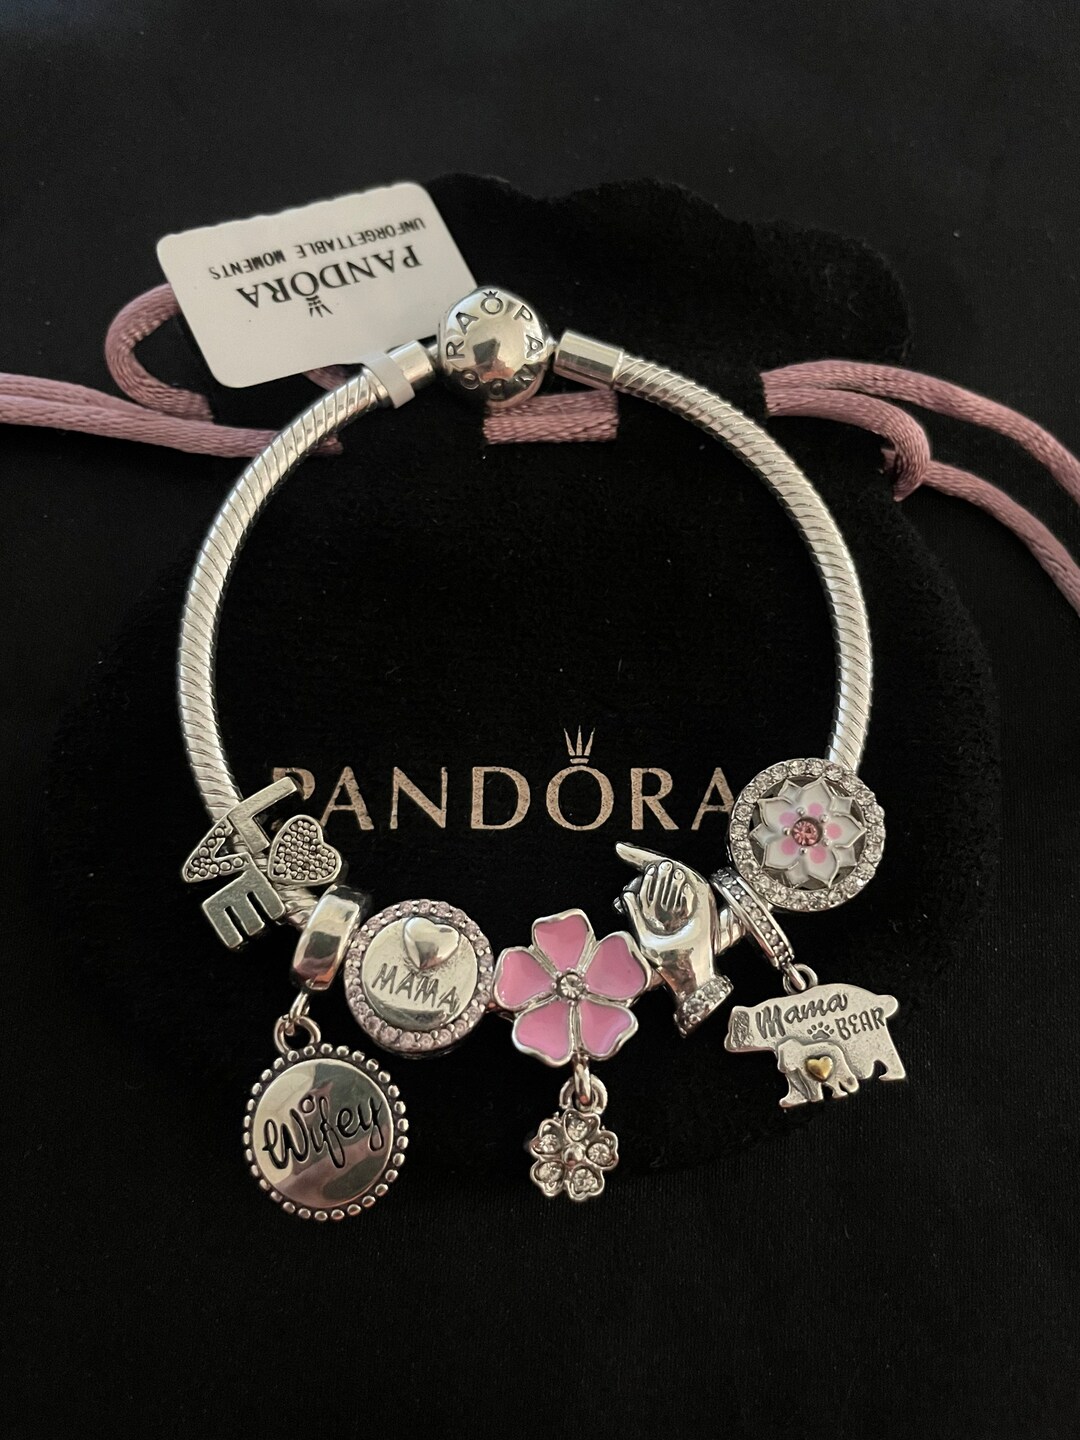 Pandora Bracelet With Mom and Wife Themed Charms - Etsy